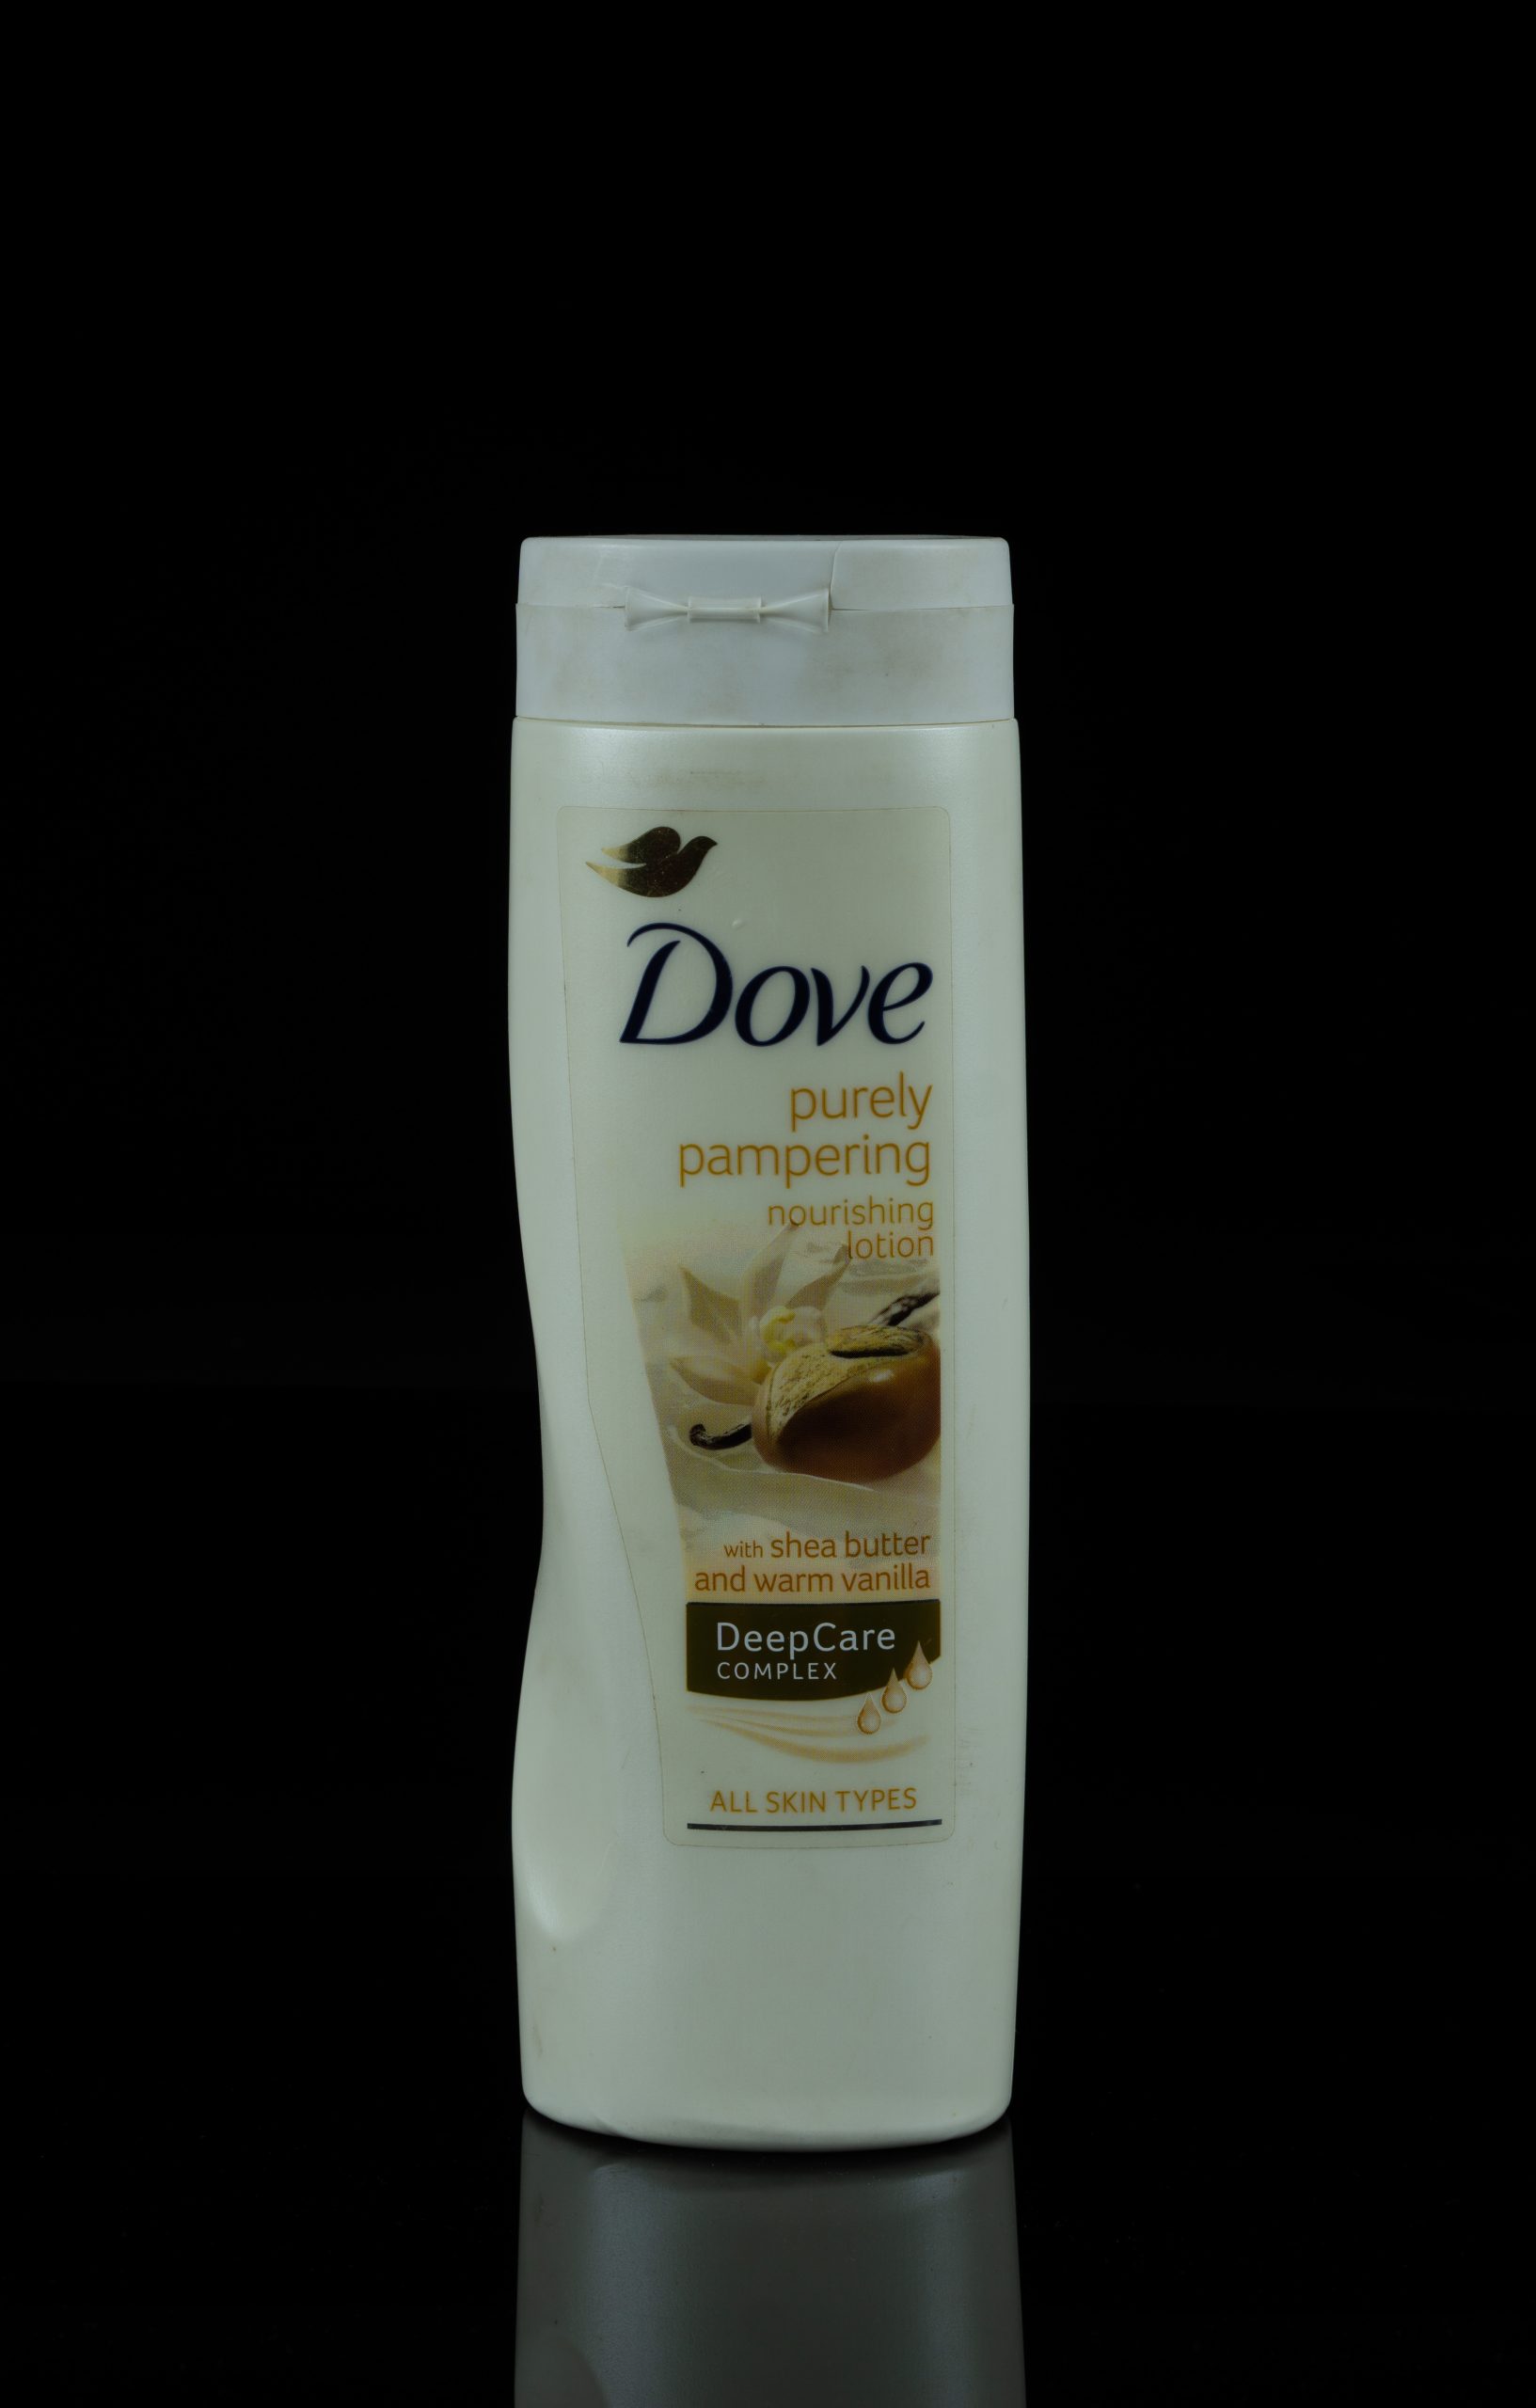 A body lotion product